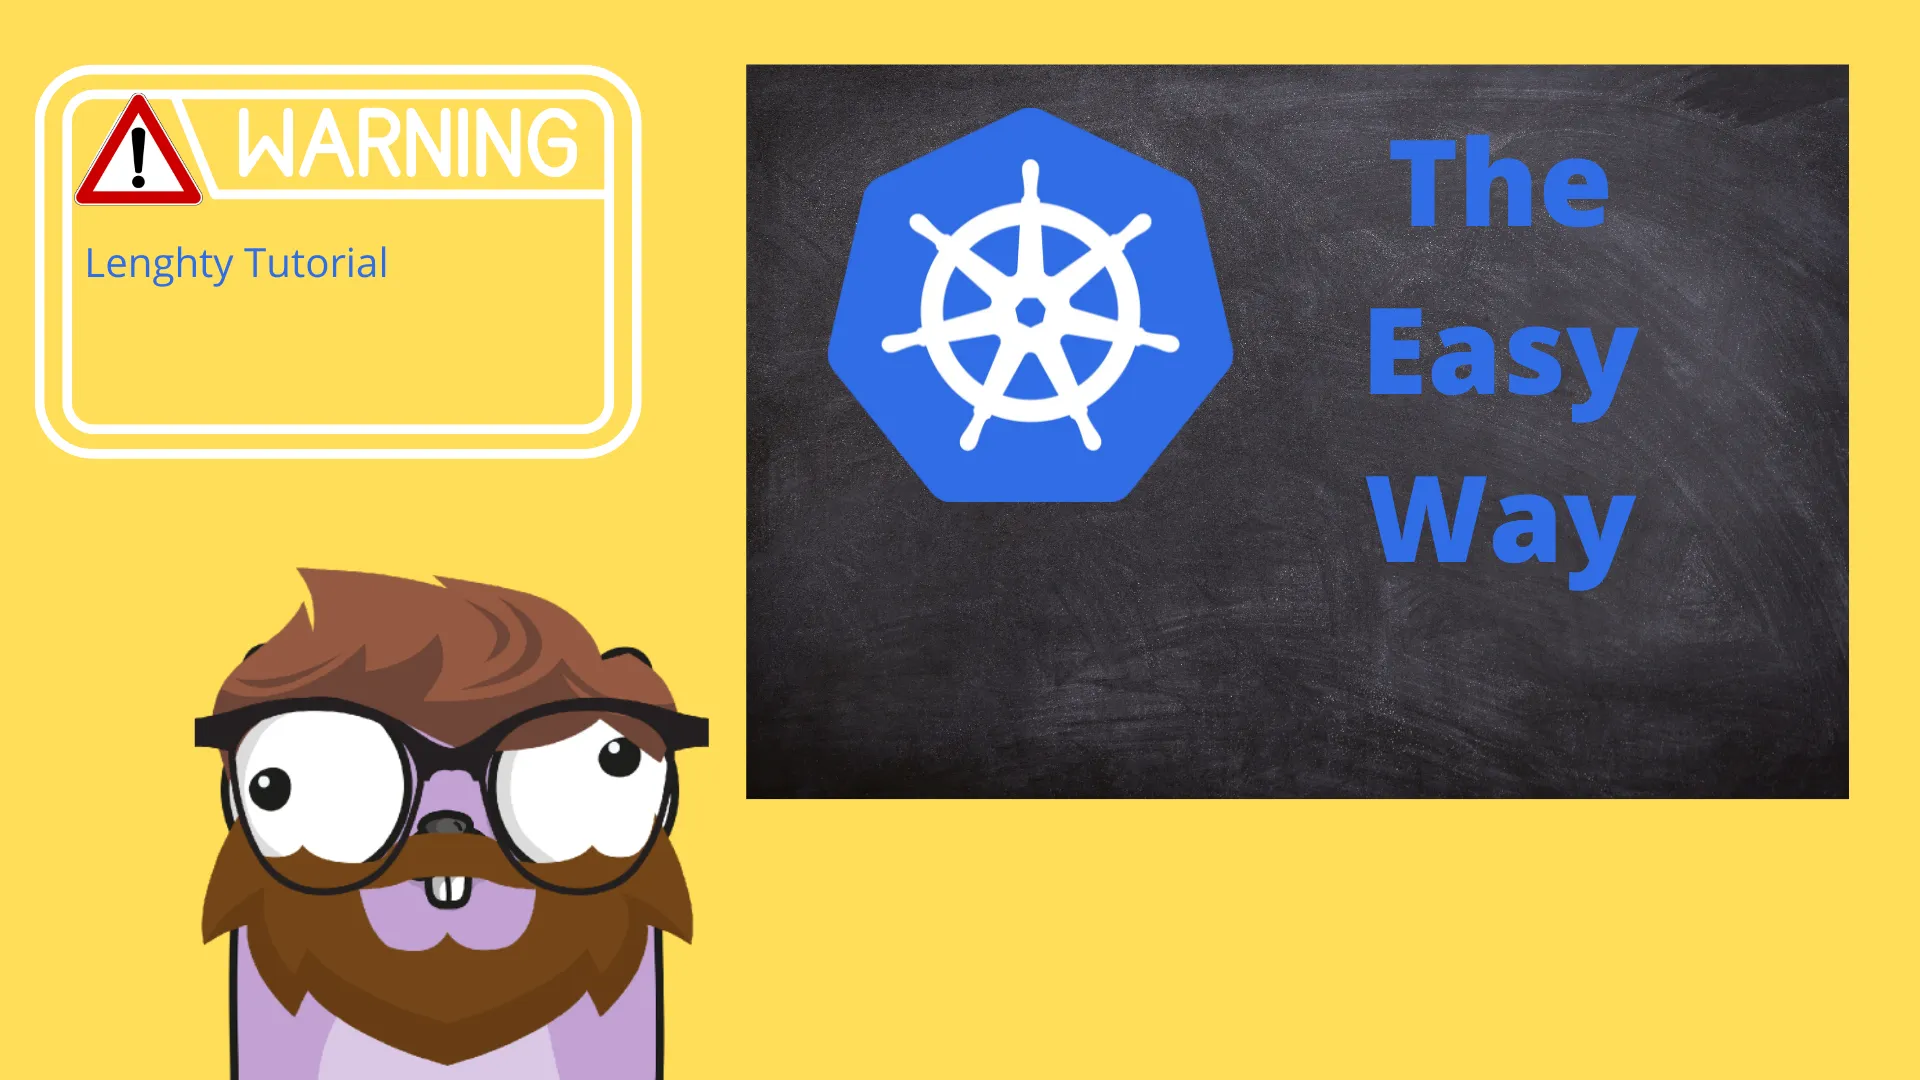 In this tutorial we learn about Kubernetes and how it can be used to orchestrate containerized applications